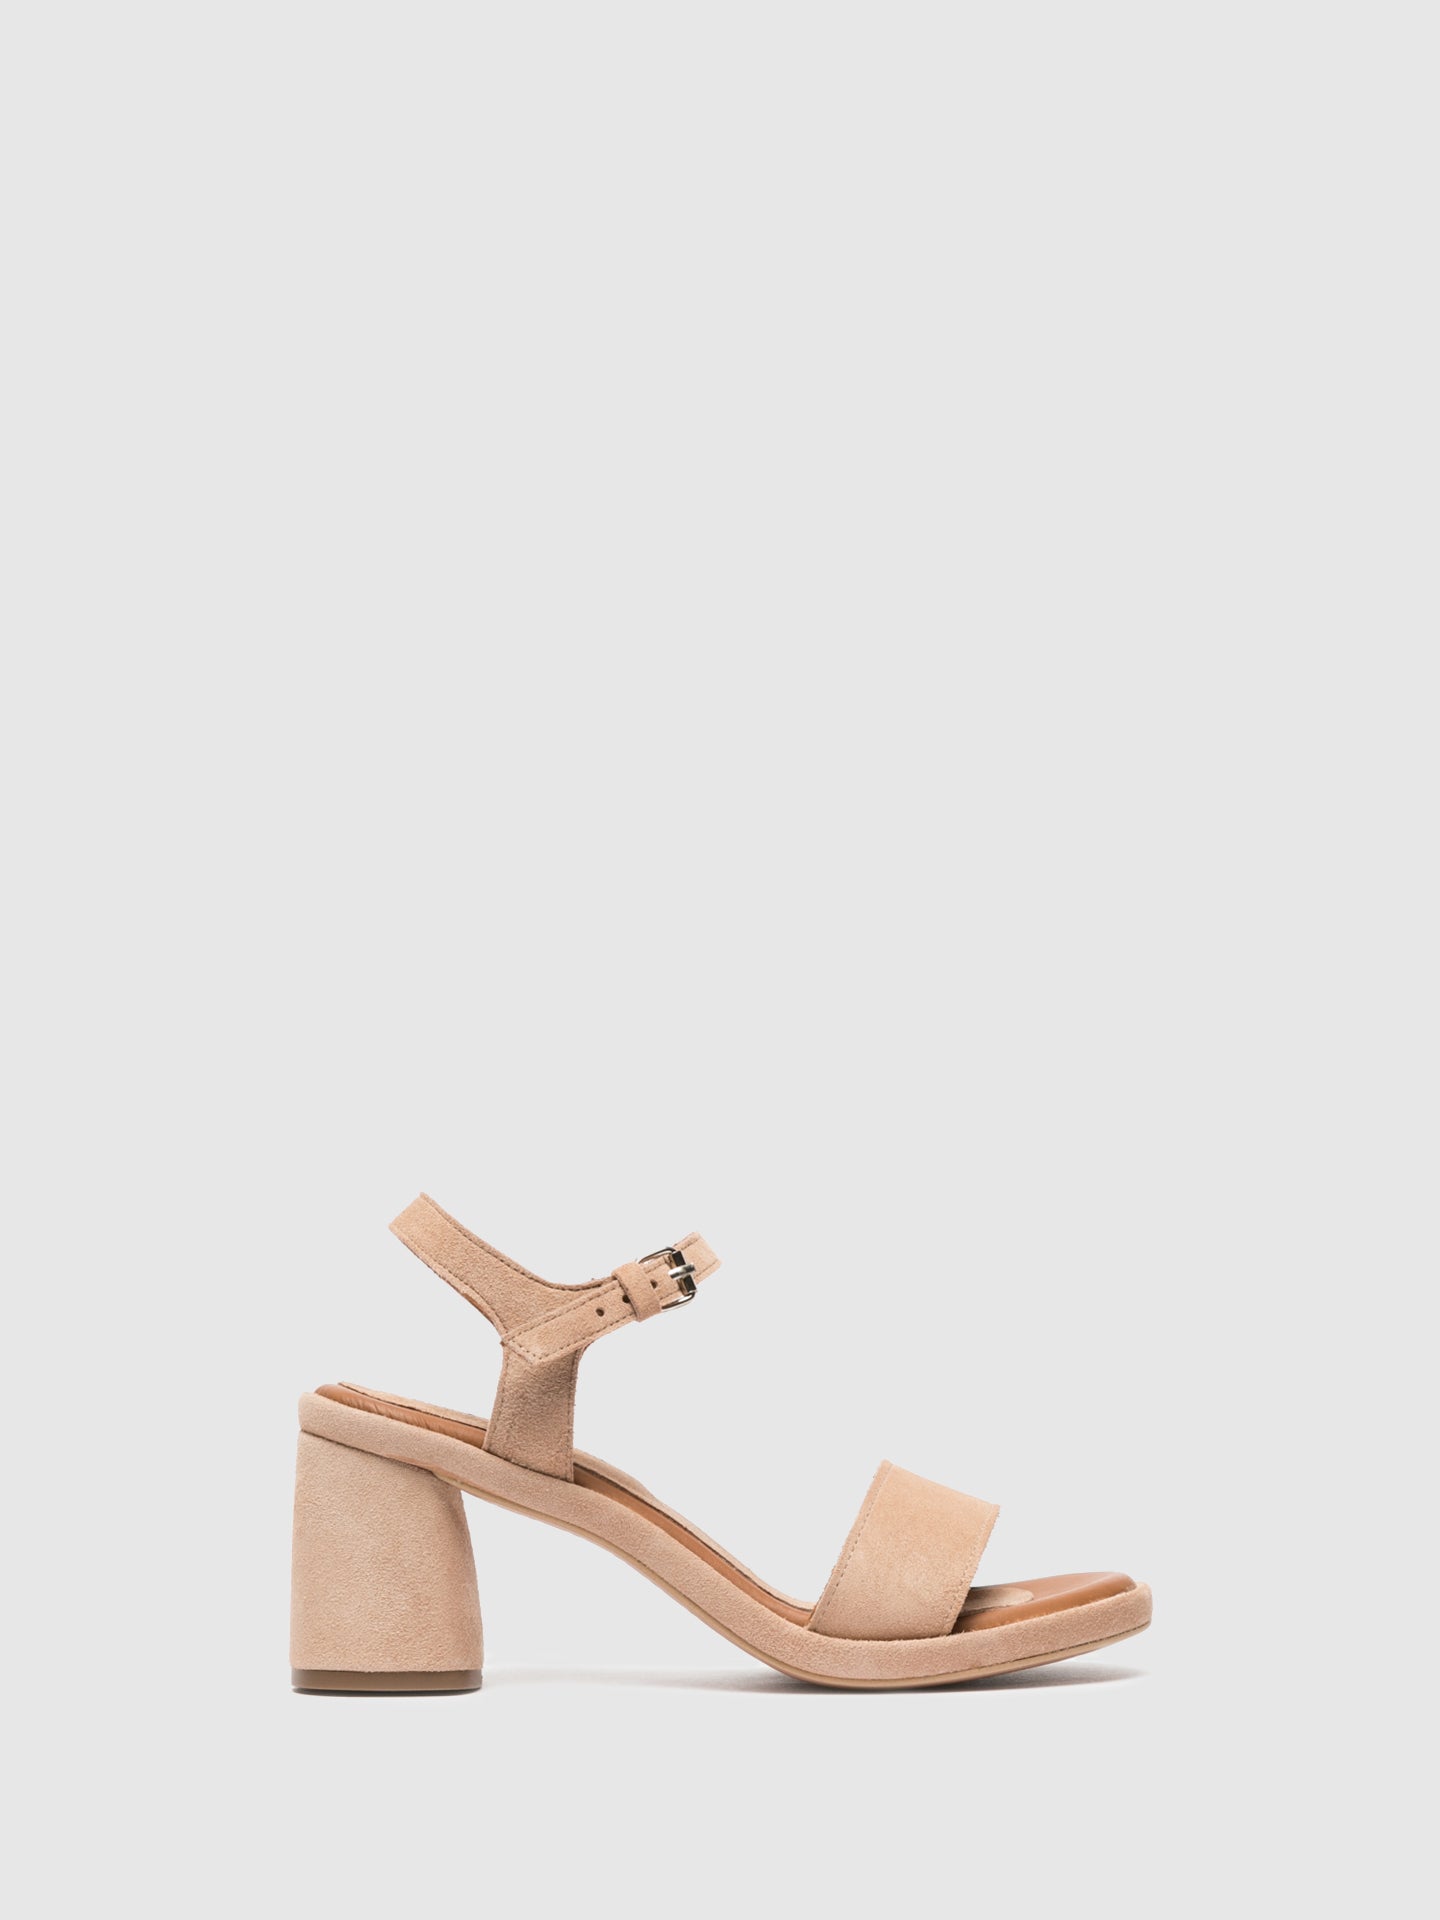 Clay's Peru Ankle Strap Sandals